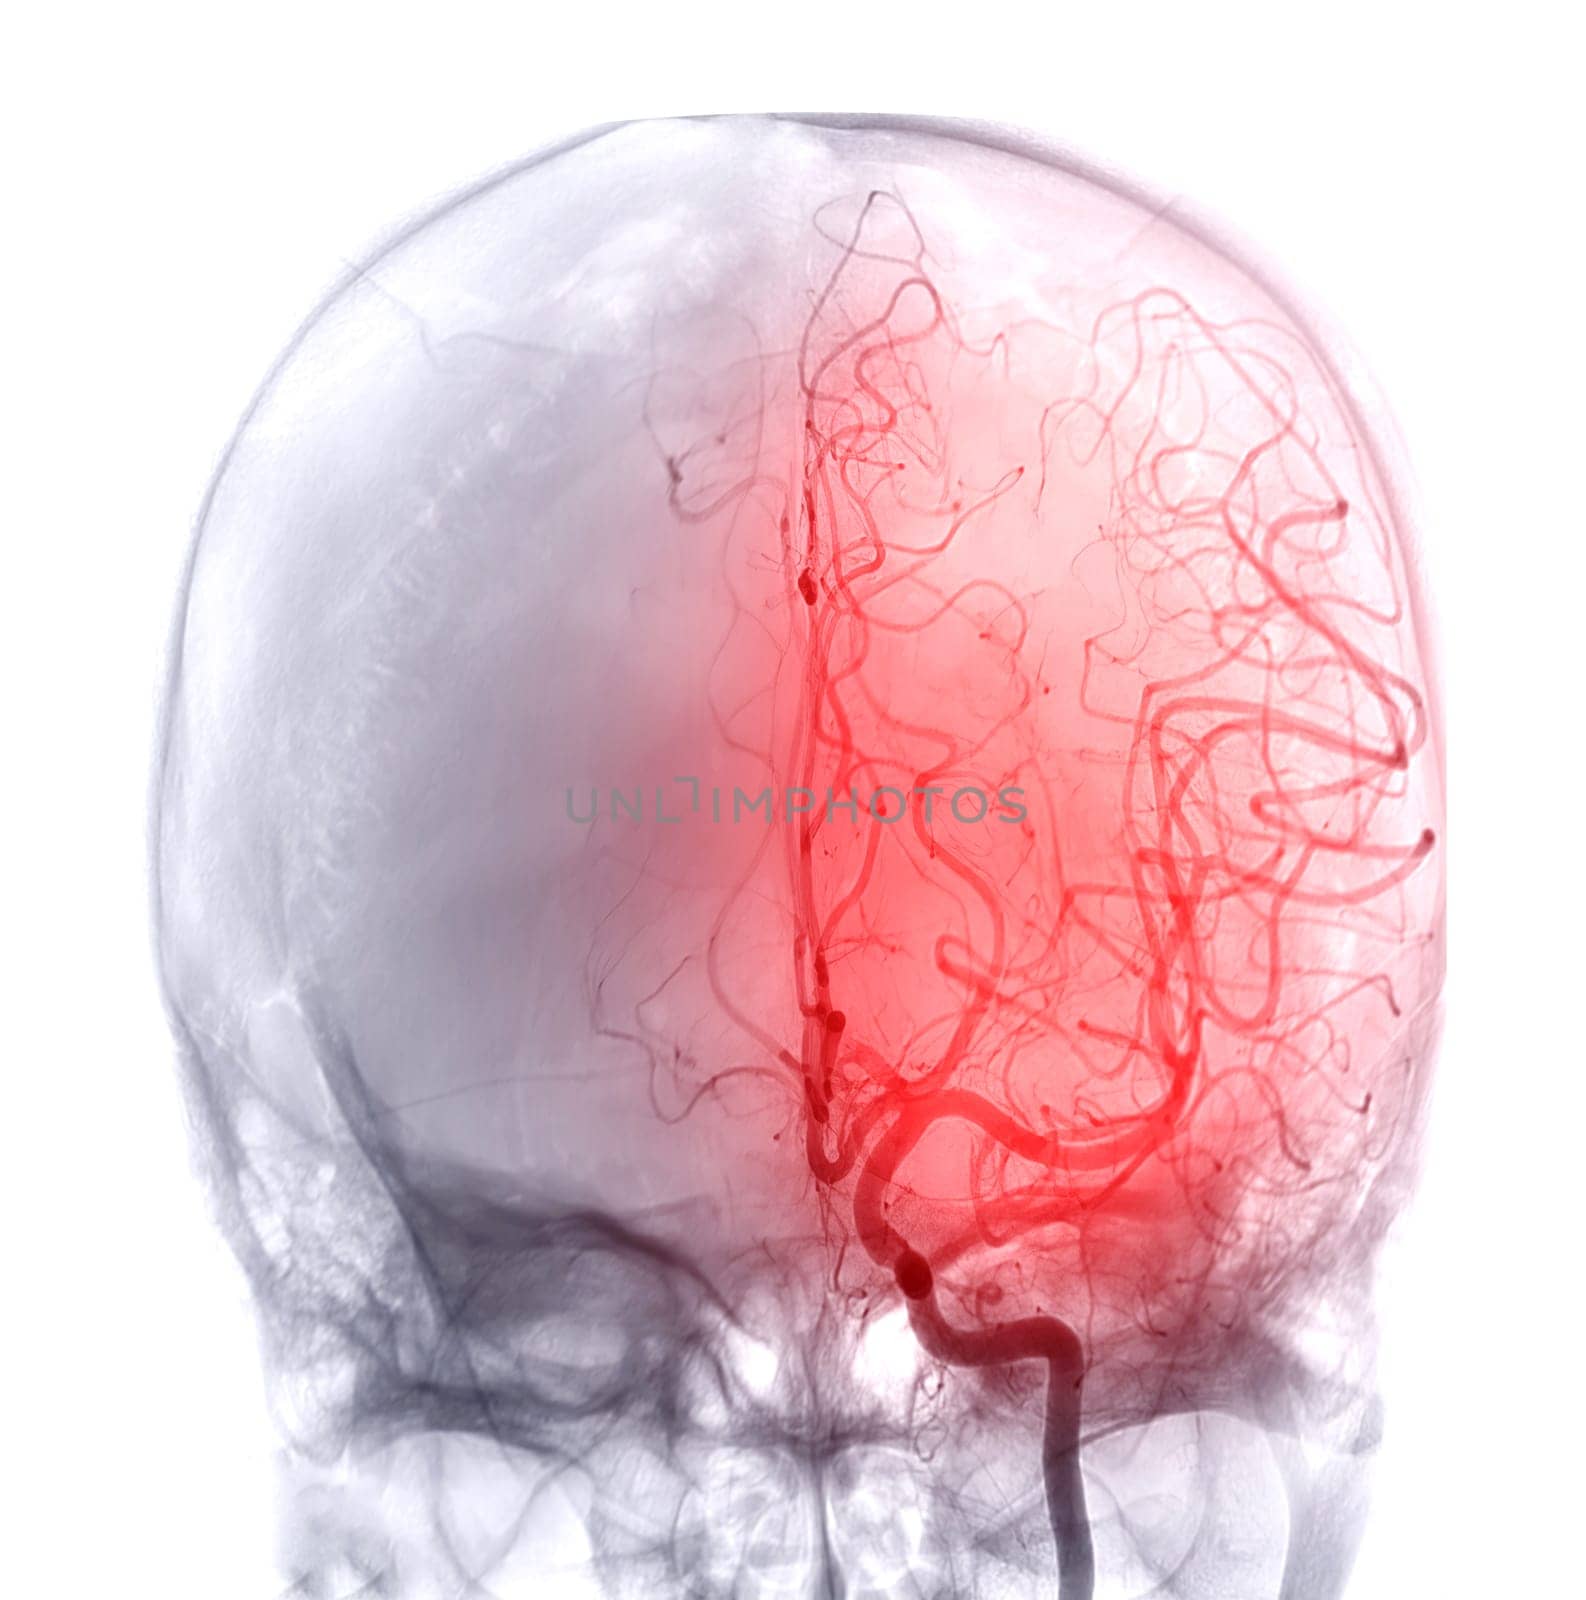 Cerebral angiography  image from Fluoroscopy in intervention radiology  showing cerebral artery. by samunella